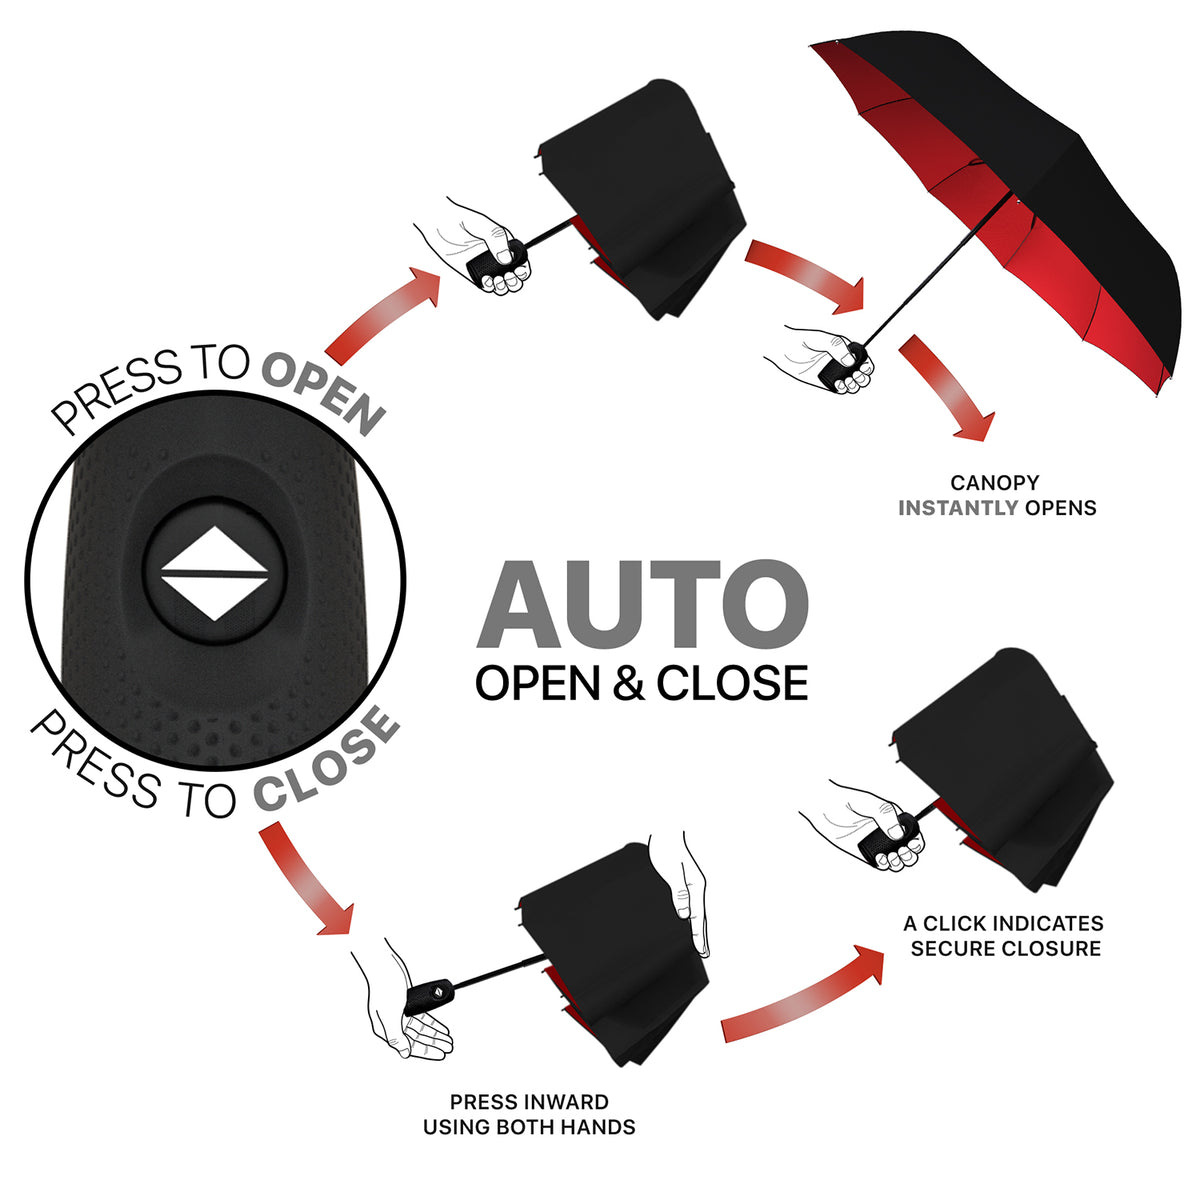 Windproof Travel Umbrella - Compact, Automatic, Red & Black